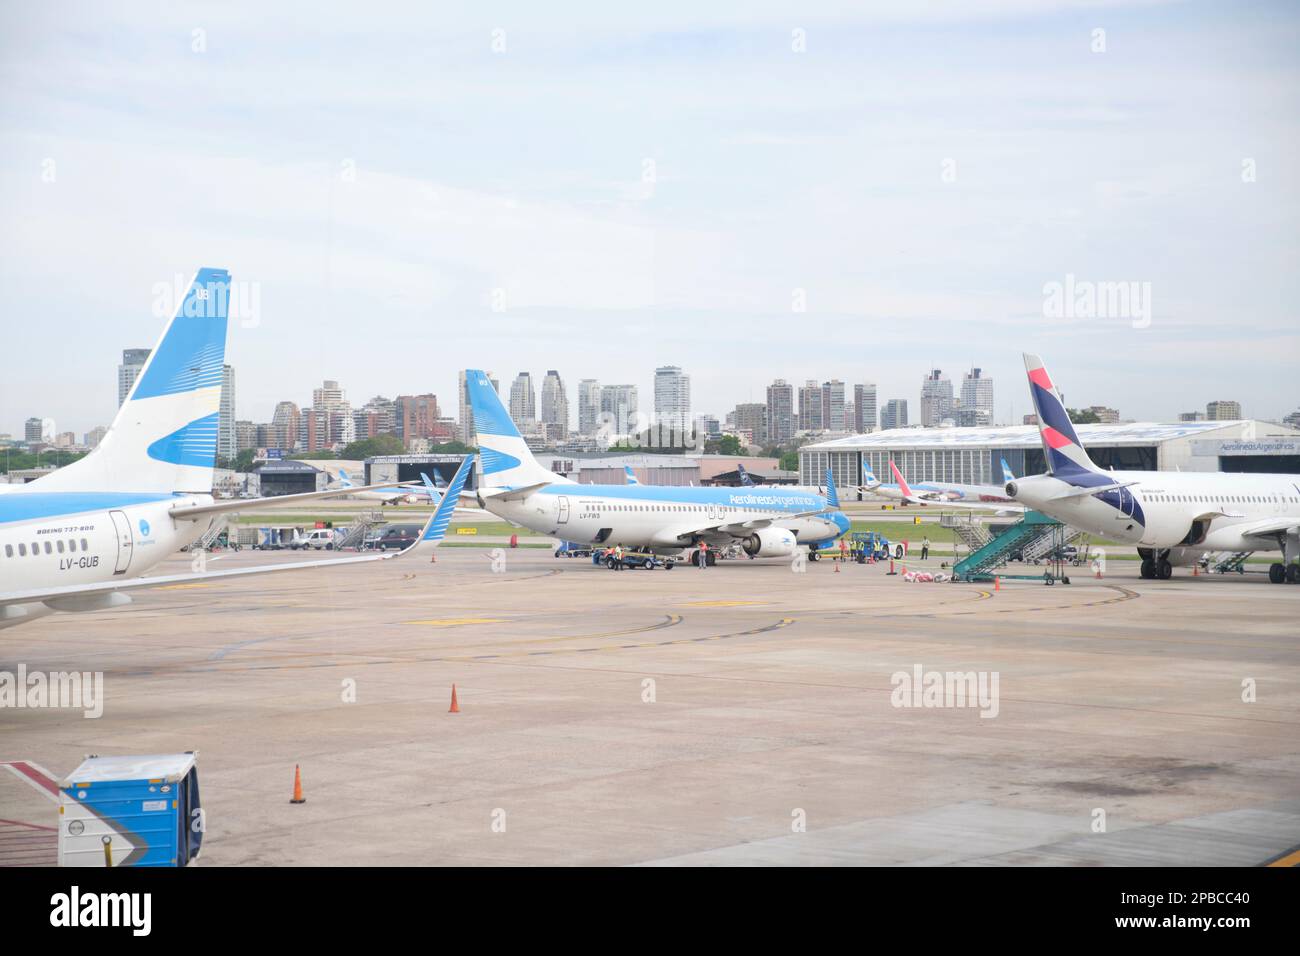 Buenos Aires, Argentina, November 18, 2022: Aerolineas Argentinas, Austral and Latam airplanes at the aircraft boarding area of the Jorge Newbery Inte Stock Photo